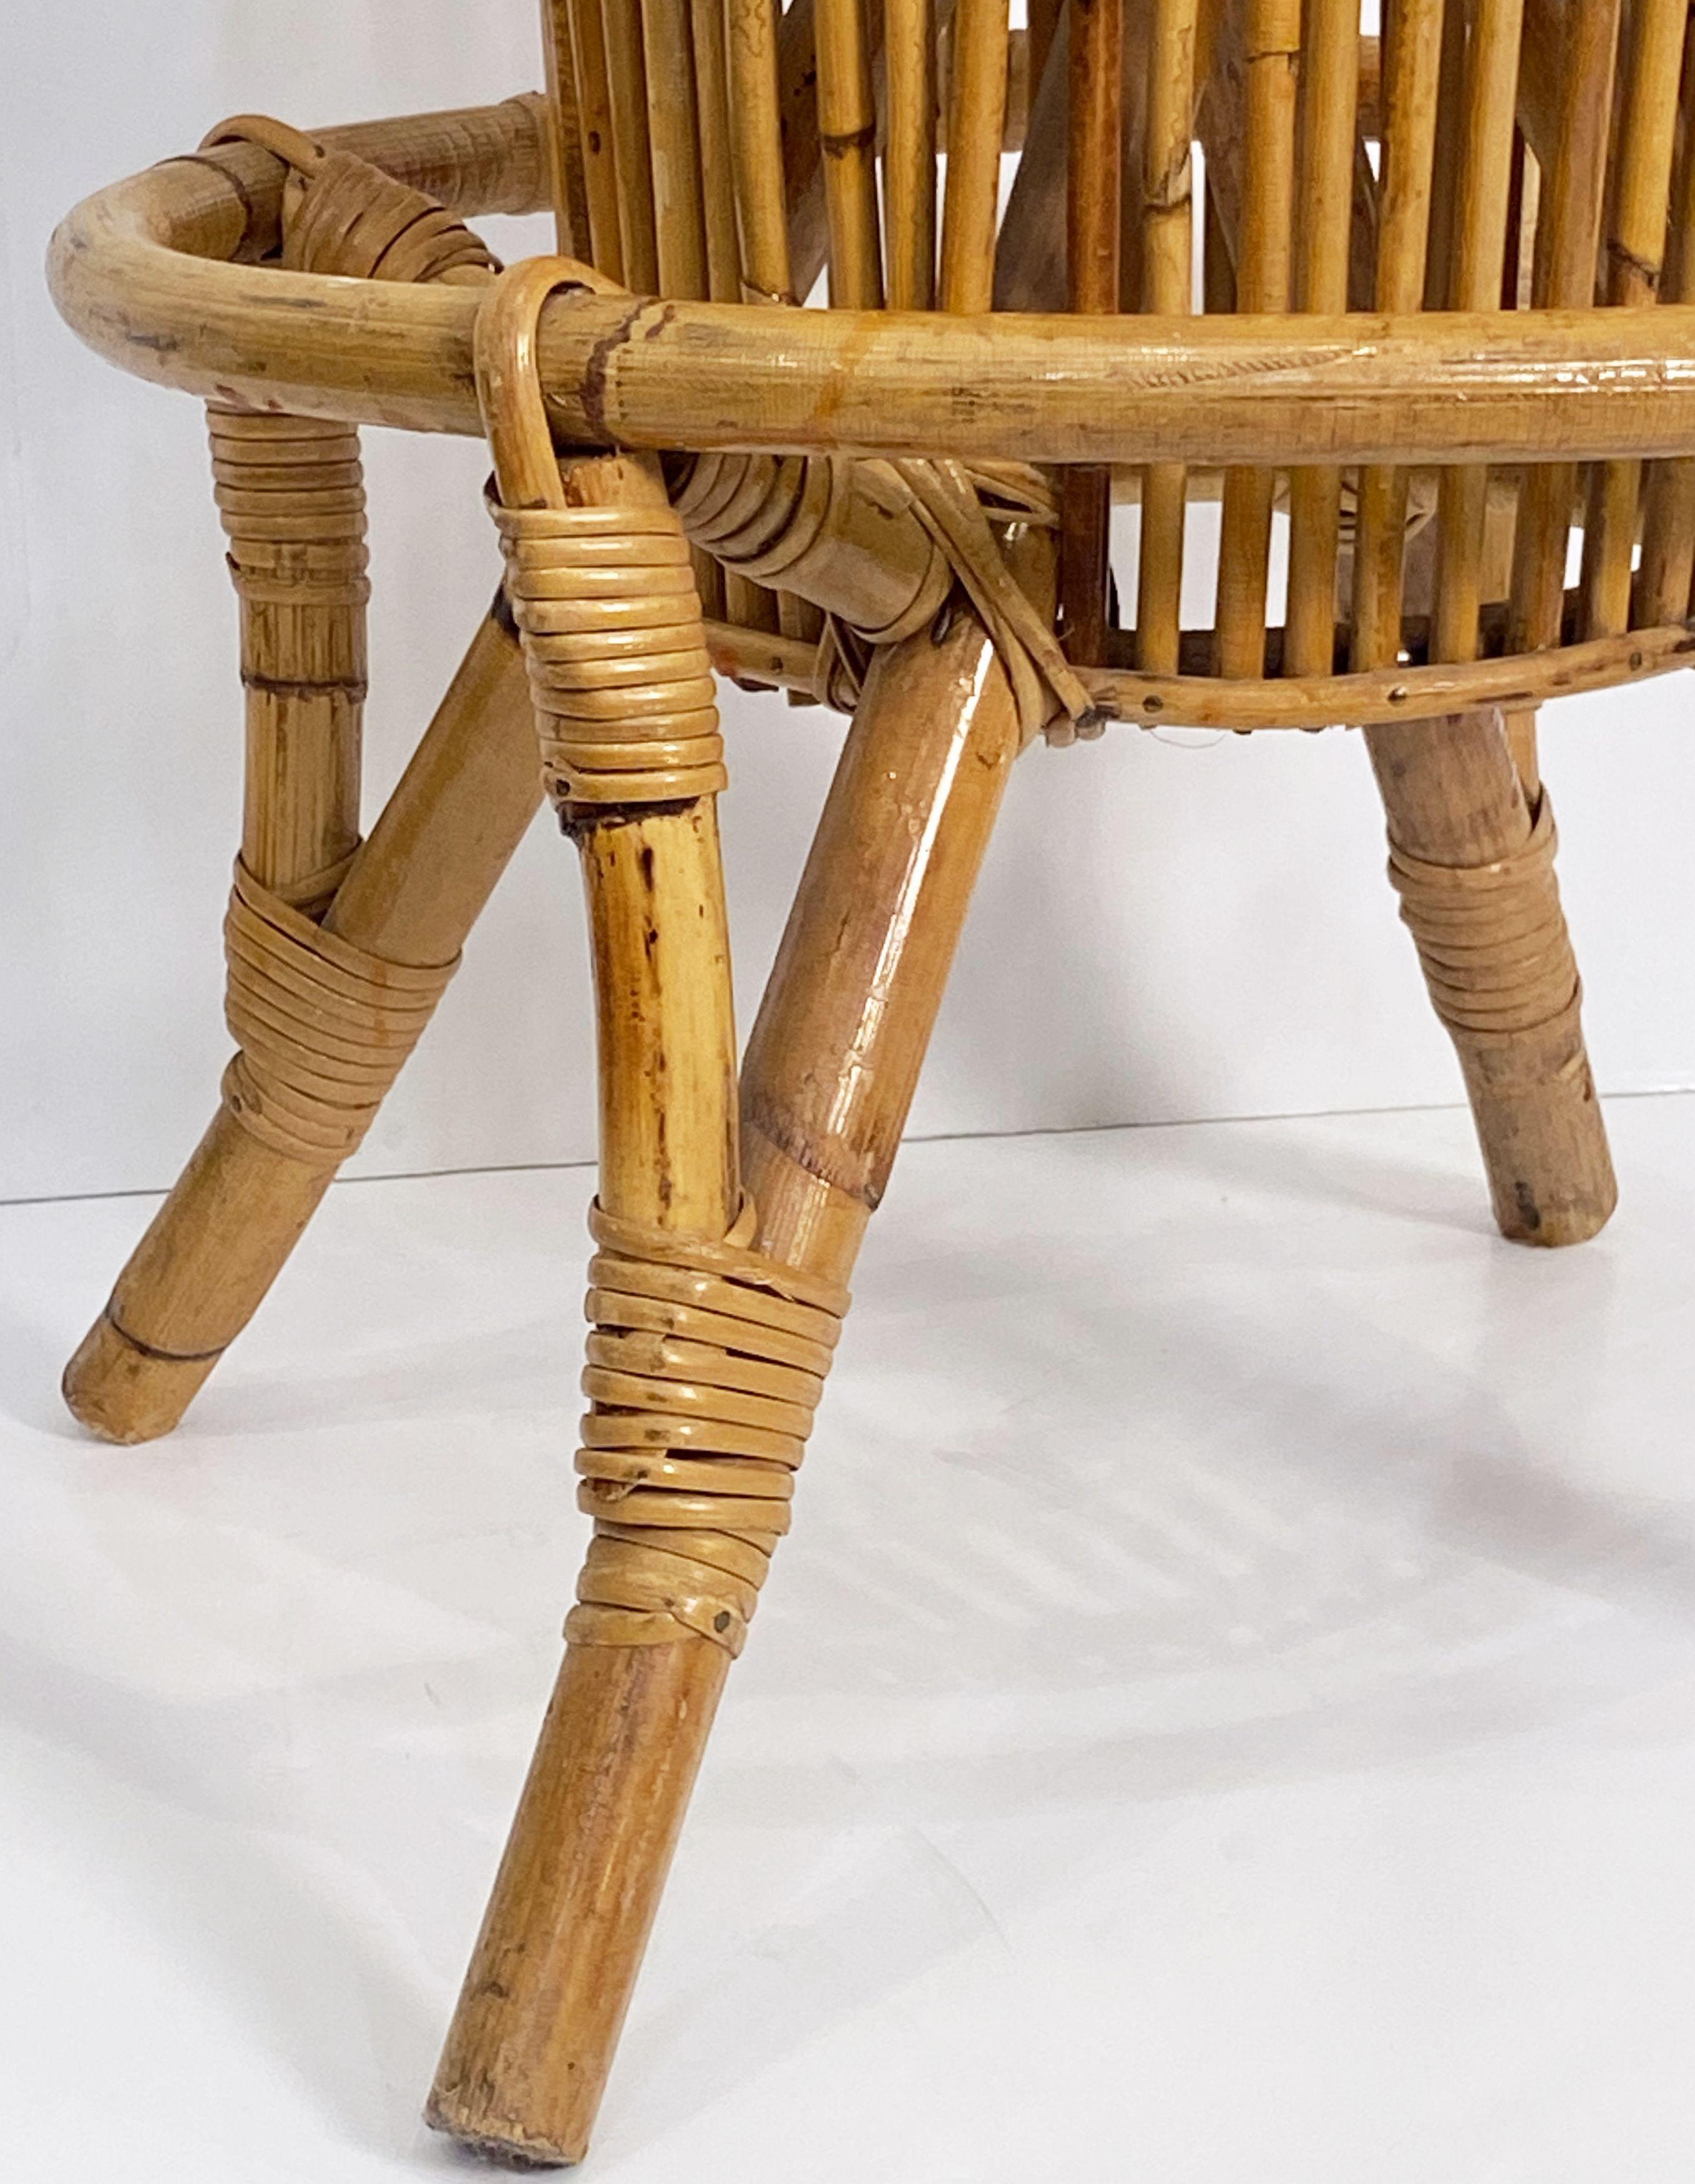 Italian Stool of Rattan and Bamboo from the Mid-20th Century For Sale 5